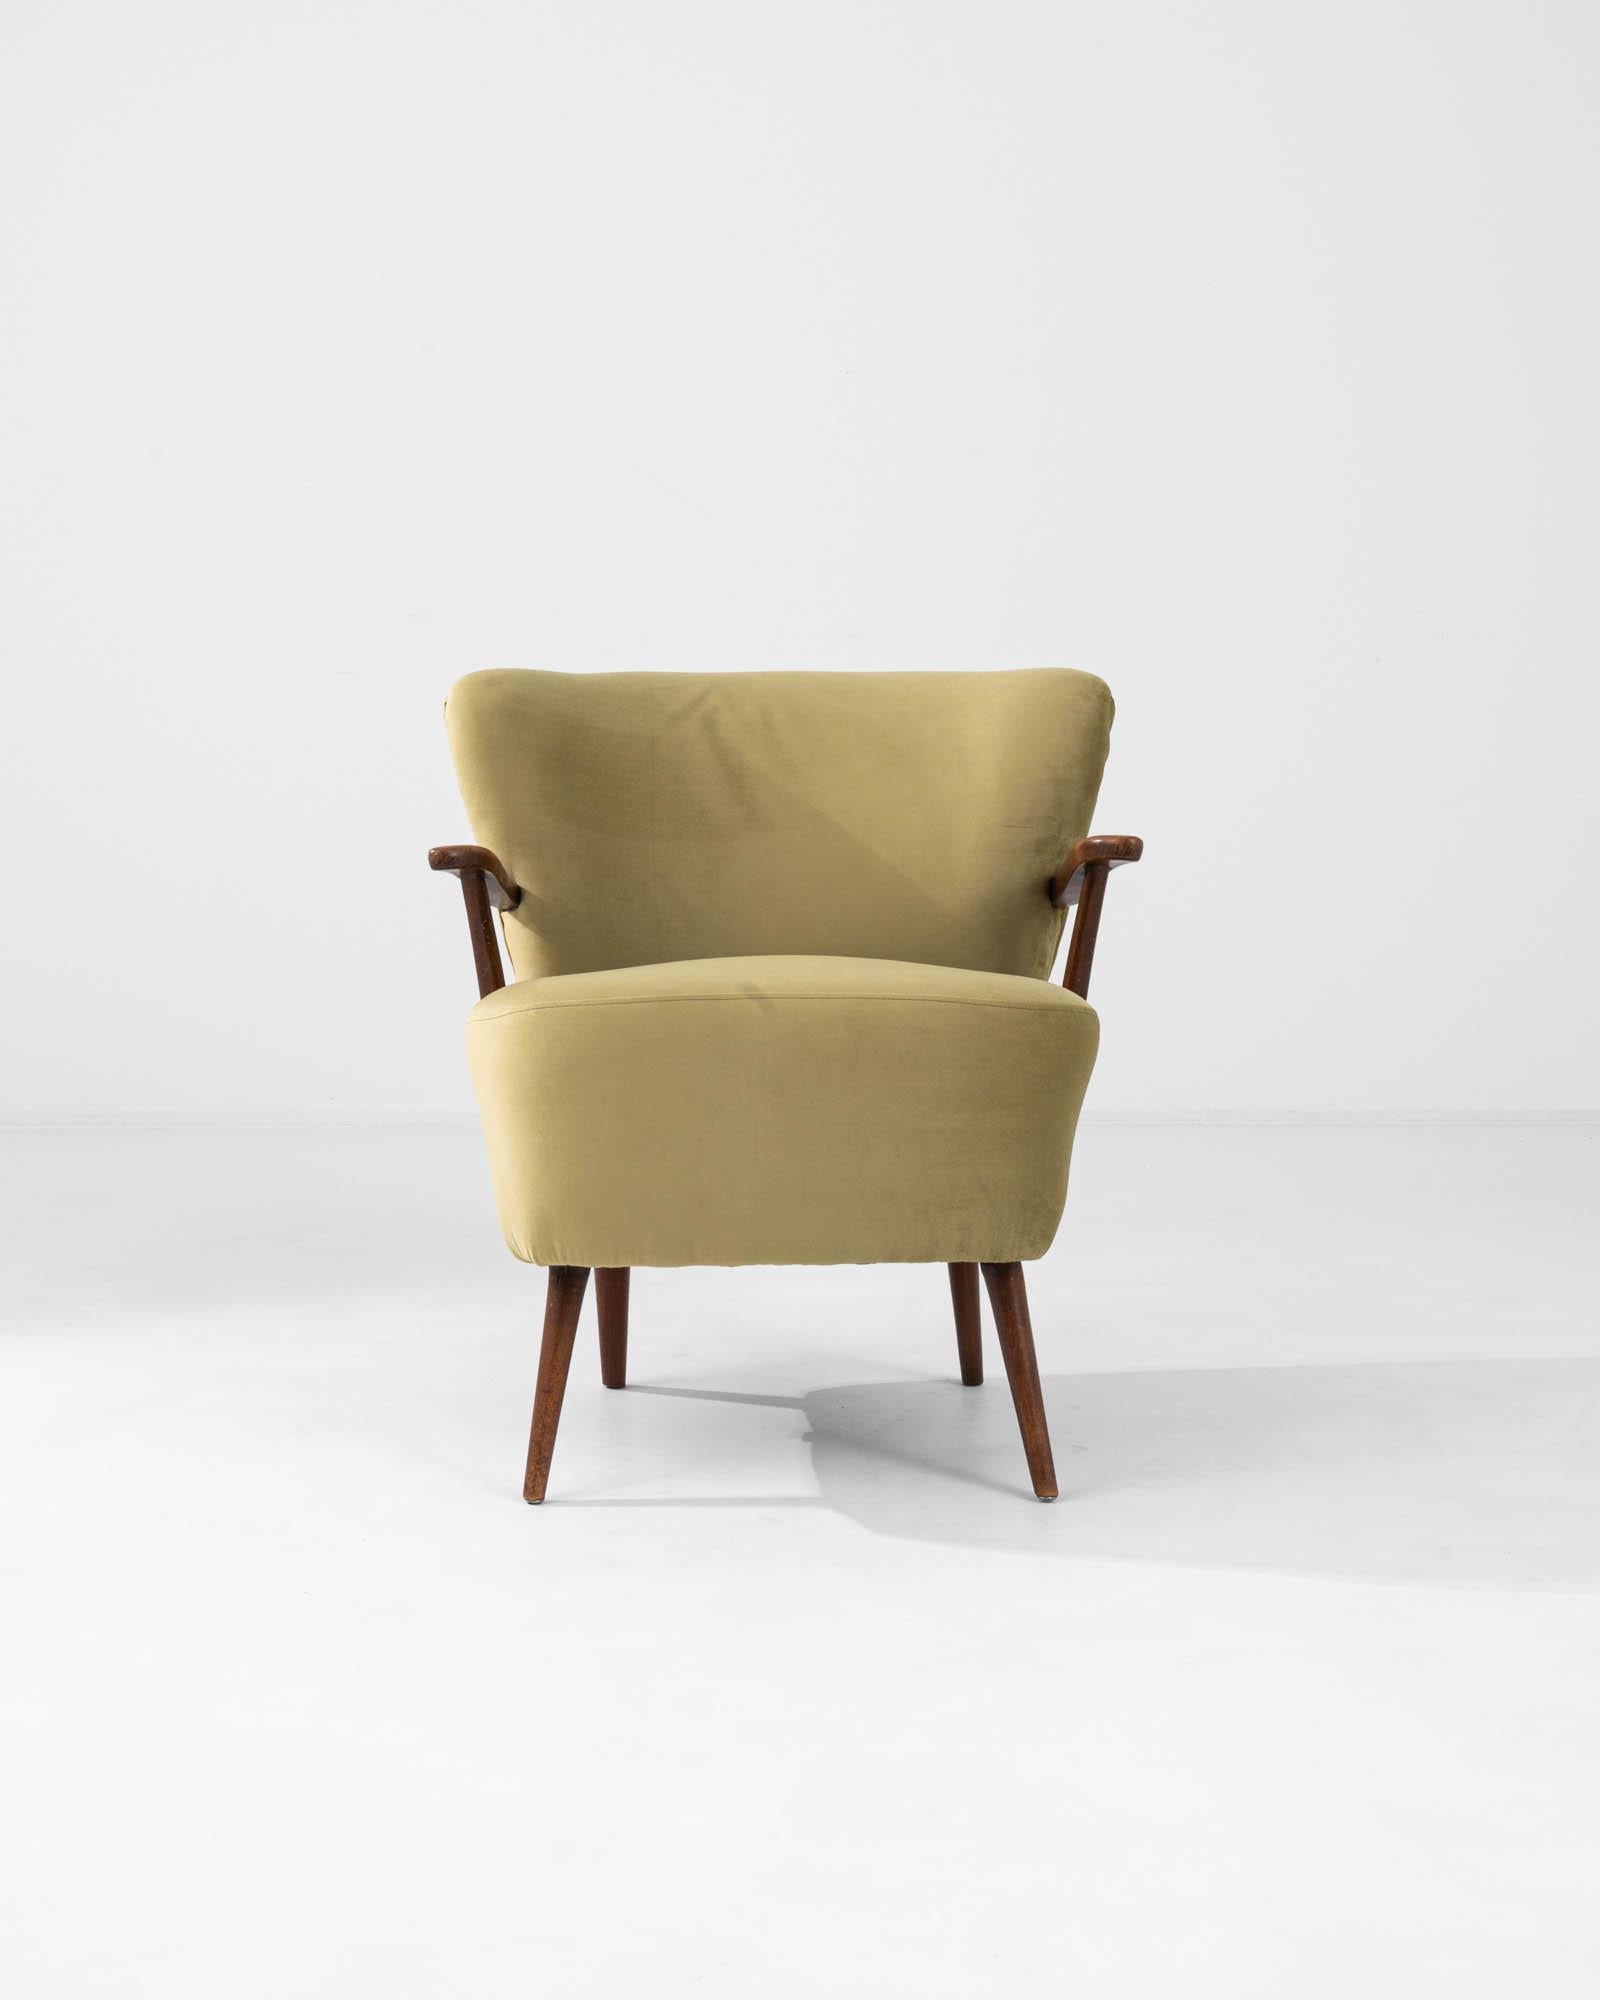 Experience the warmth and allure of this 20th Century Danish Upholstered Armchair, a singular piece that captivates with its understated beauty. Wrapped in a textured olive-yellow fabric, it offers a cheerful and inviting ambiance. The chair’s sleek